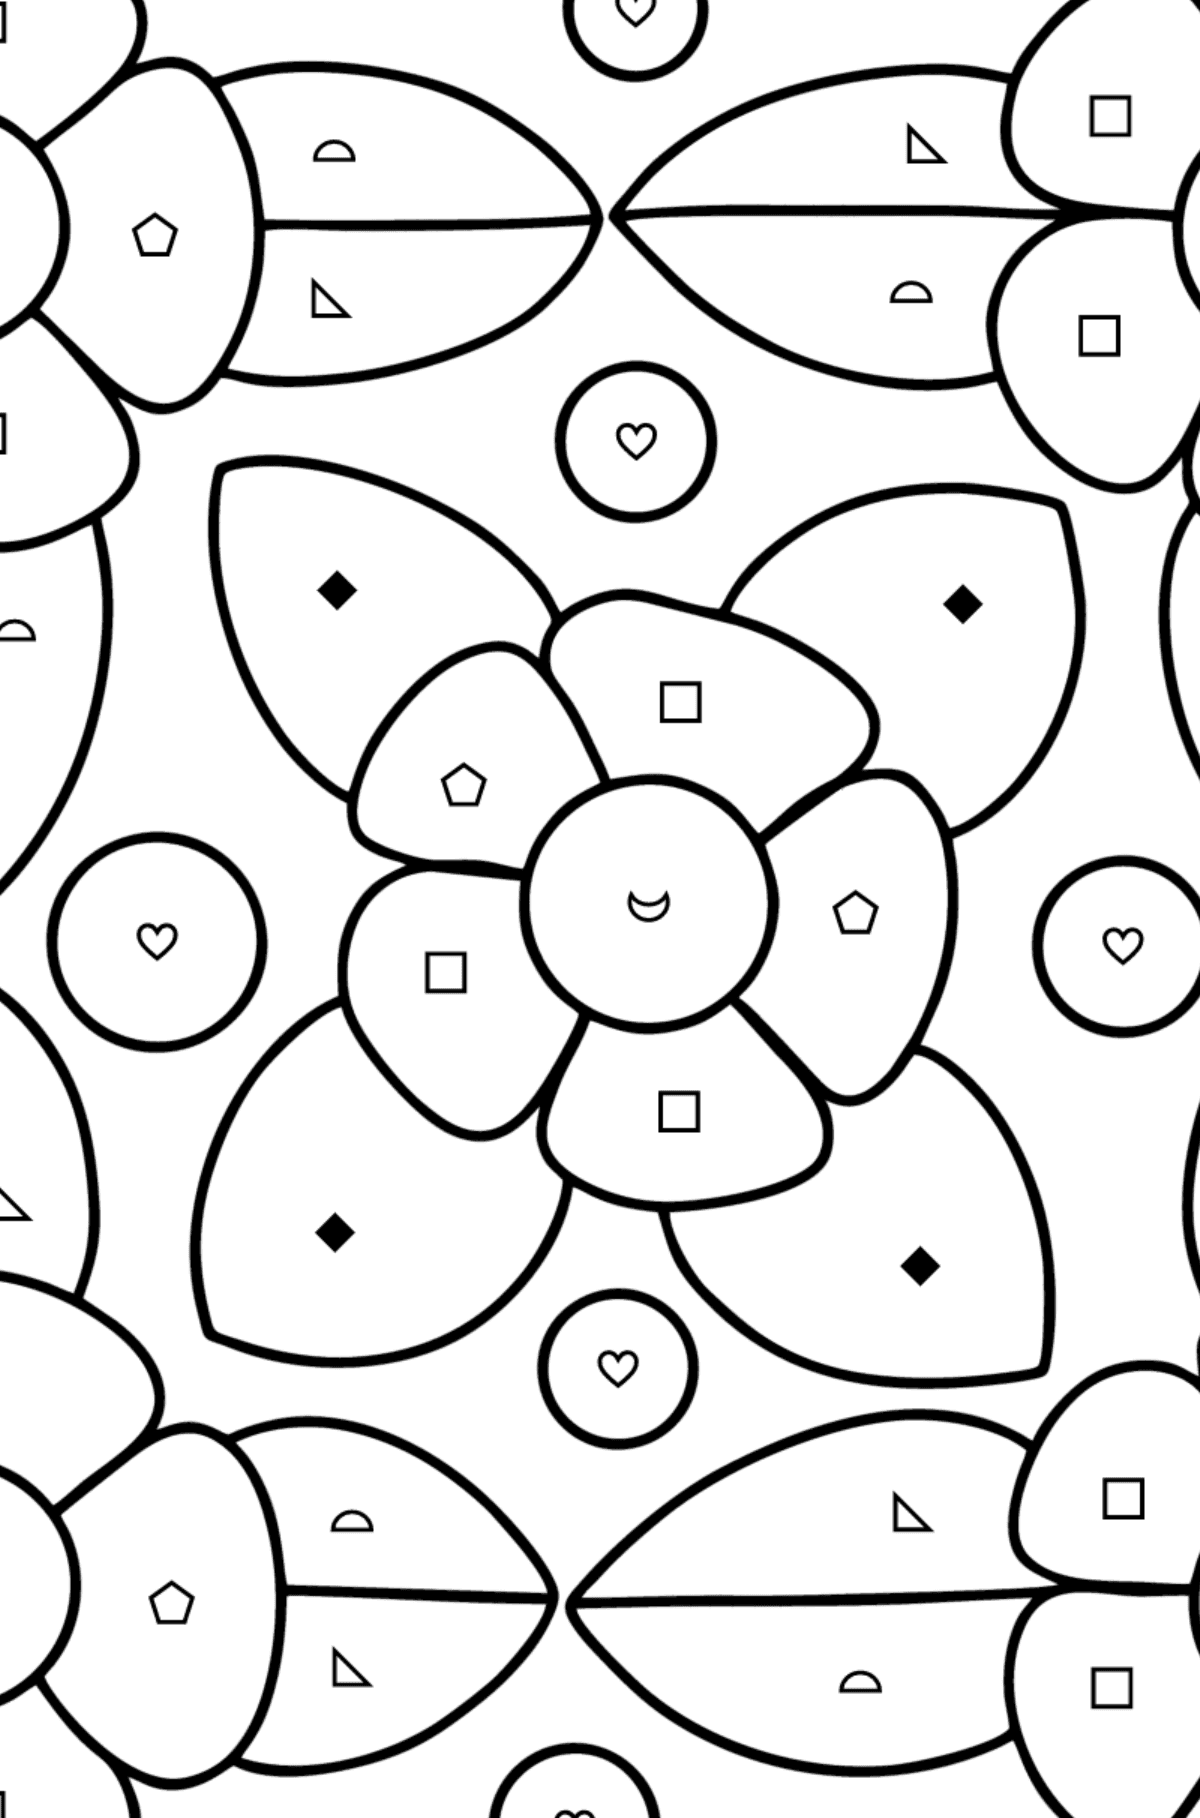 Difficult coloring pattern for kids - Coloring by Symbols and Geometric Shapes for Kids